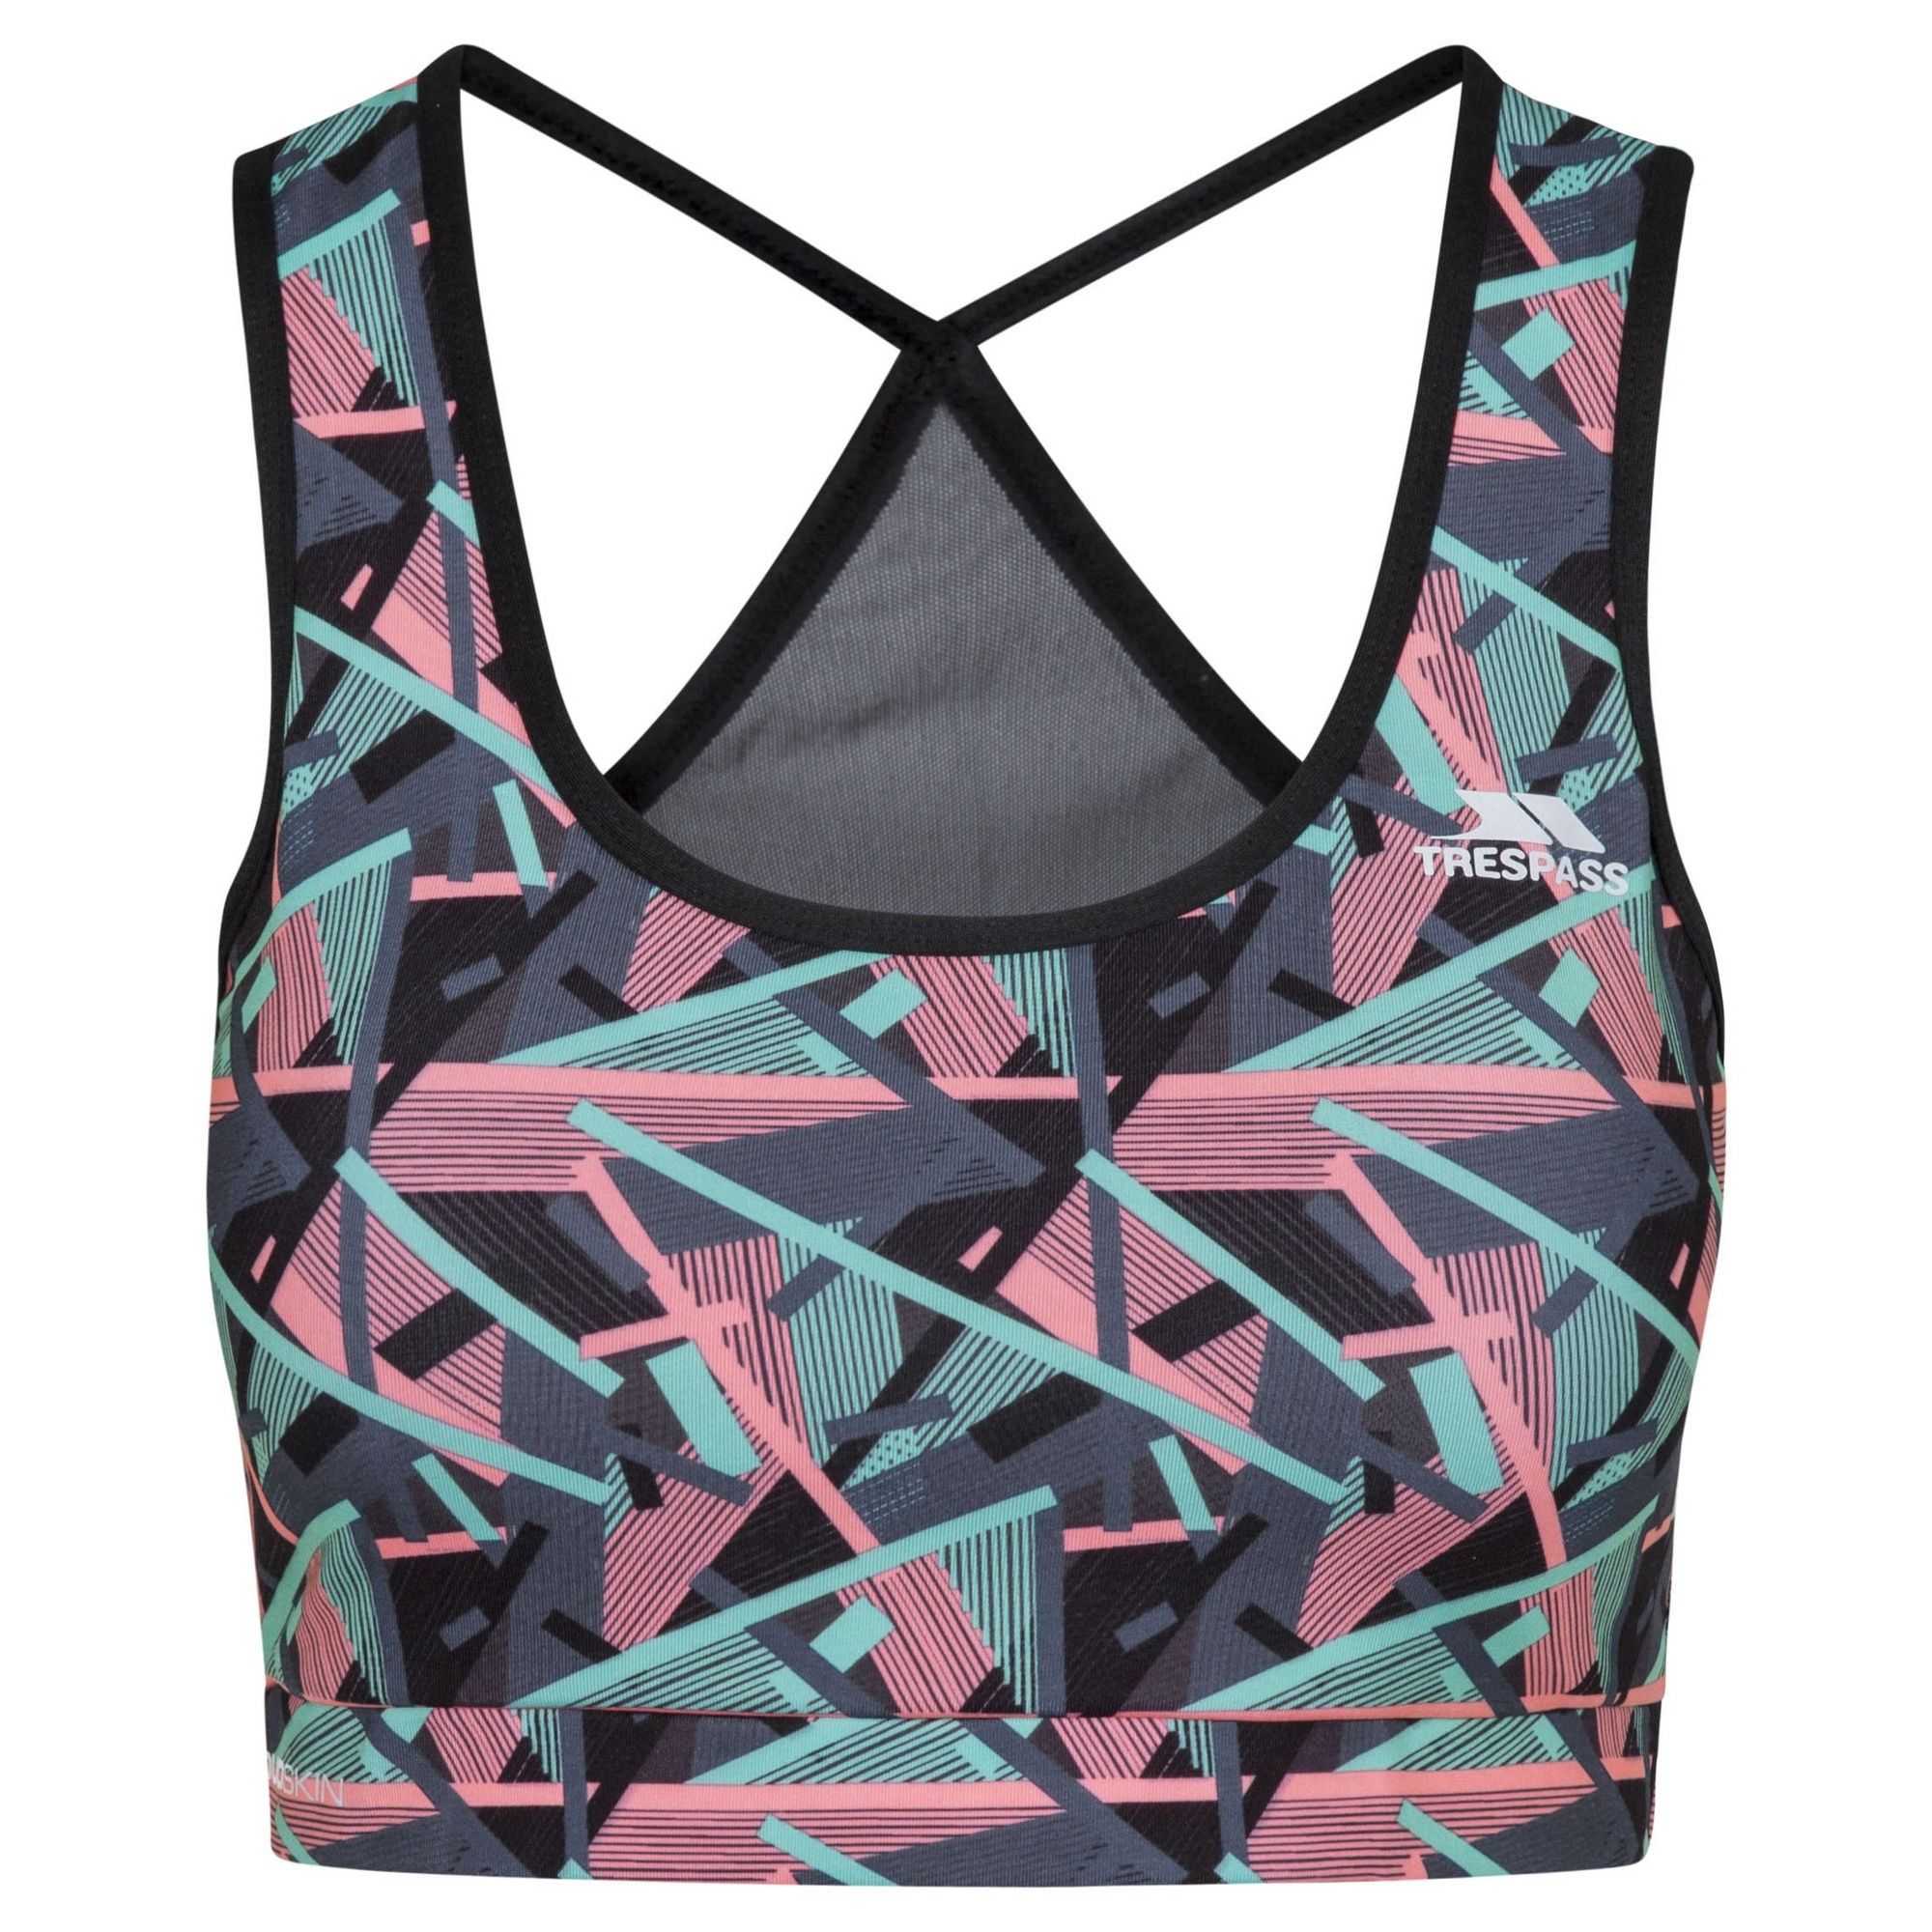 Supportive fabric. Contrast back panel. Contrast trims. Reflective printed logos. Wicking. Quick dry. 90% Polyester, 10% Elastane. Trespass Womens Chest Sizing (approx): XS/8 - 32in/81cm, S/10 - 34in/86cm, M/12 - 36in/91.4cm, L/14 - 38in/96.5cm, XL/16 - 40in/101.5cm, XXL/18 - 42in/106.5cm.